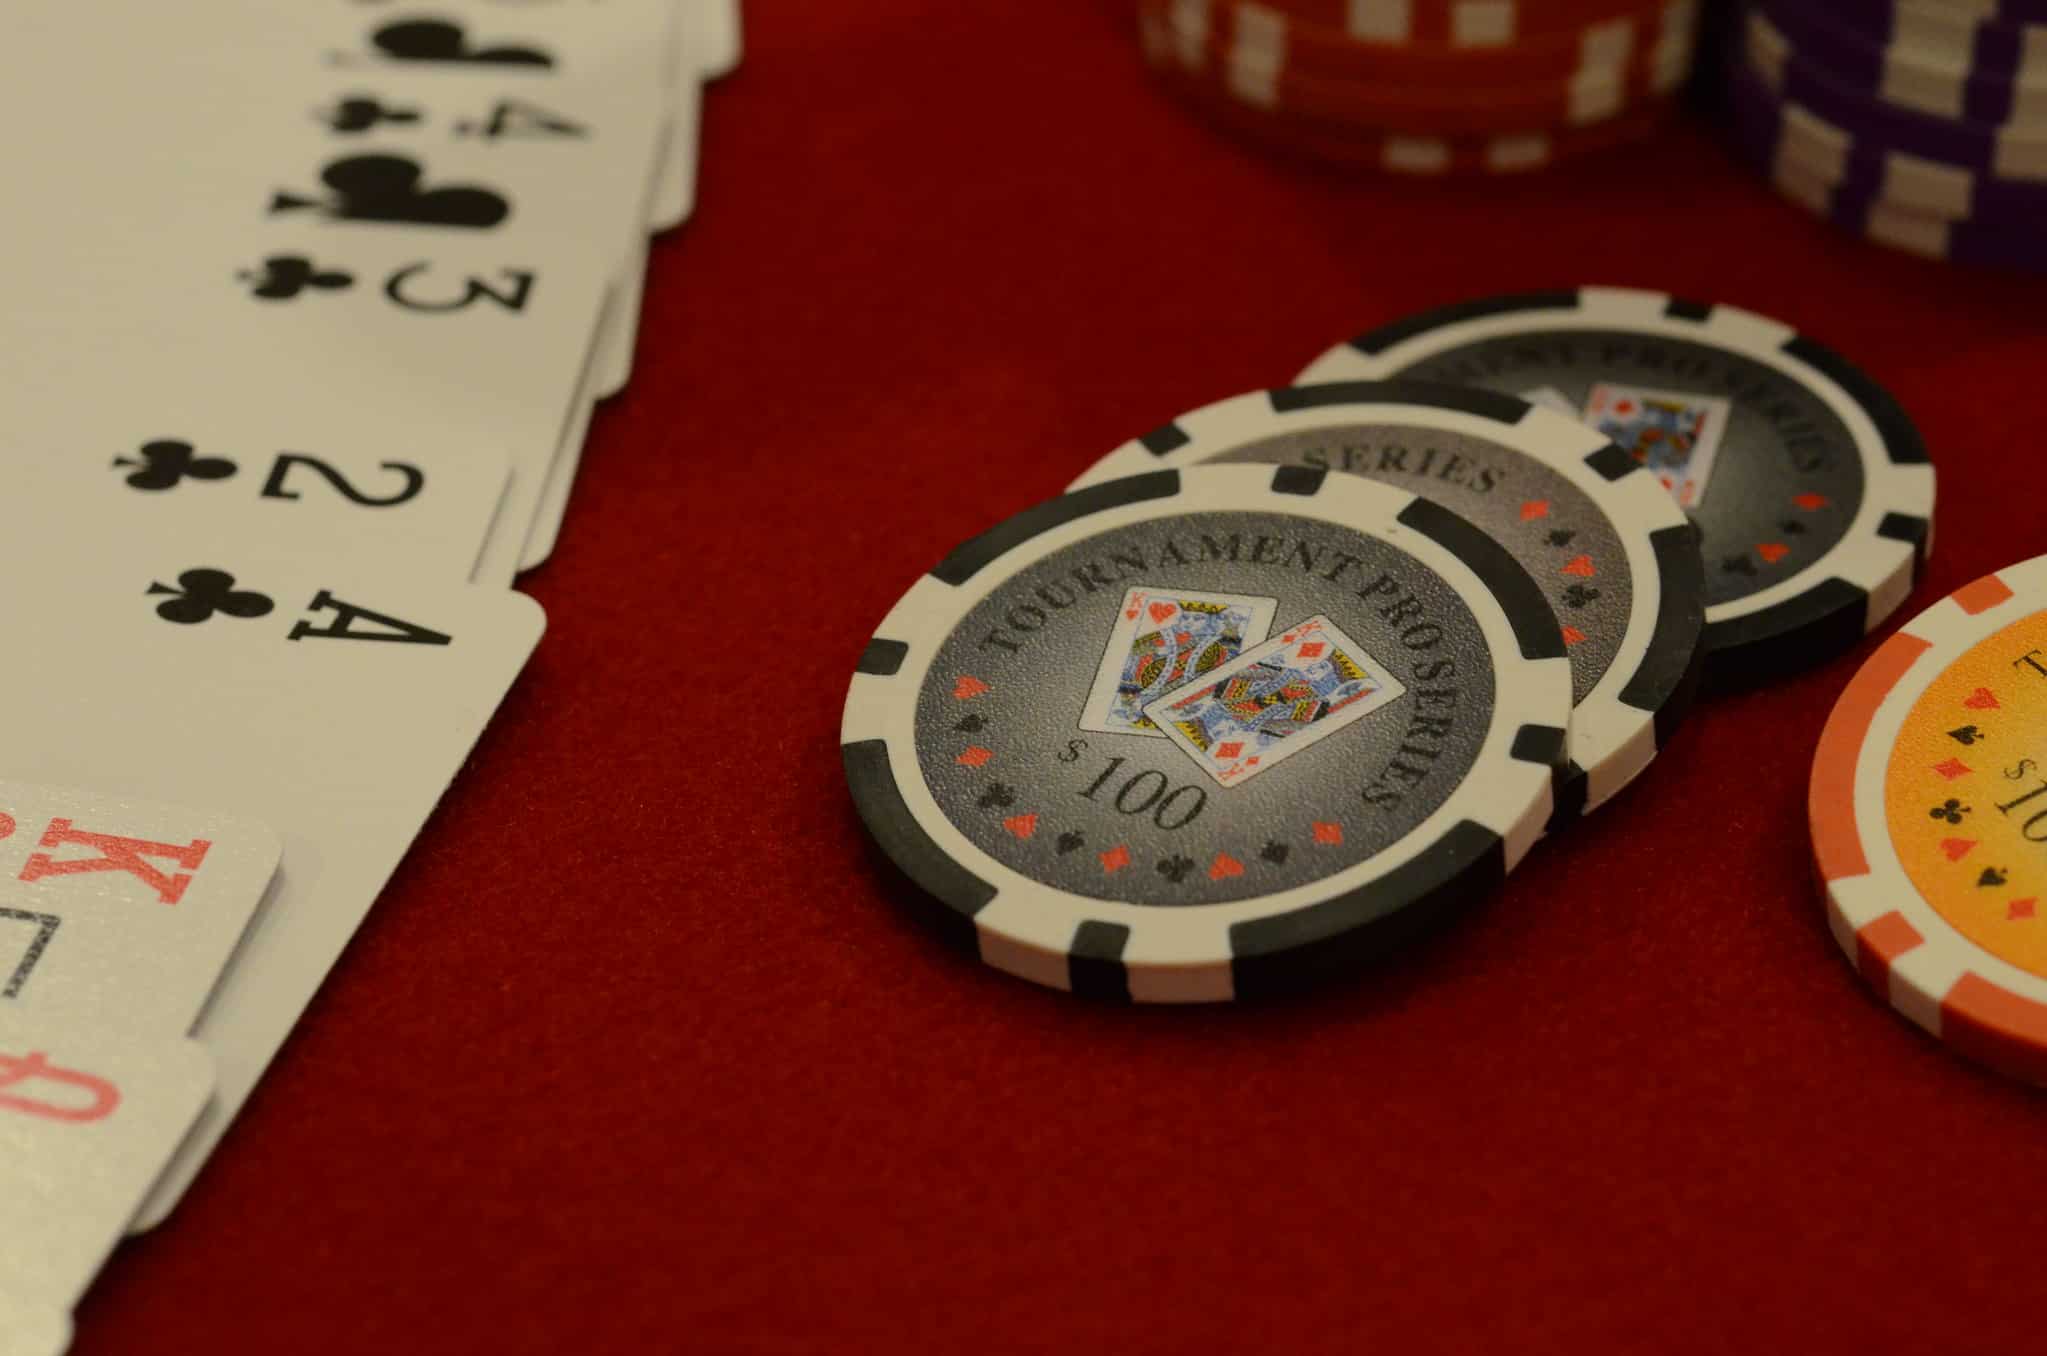 How To Find The Time To how to deal poker chips On Twitter